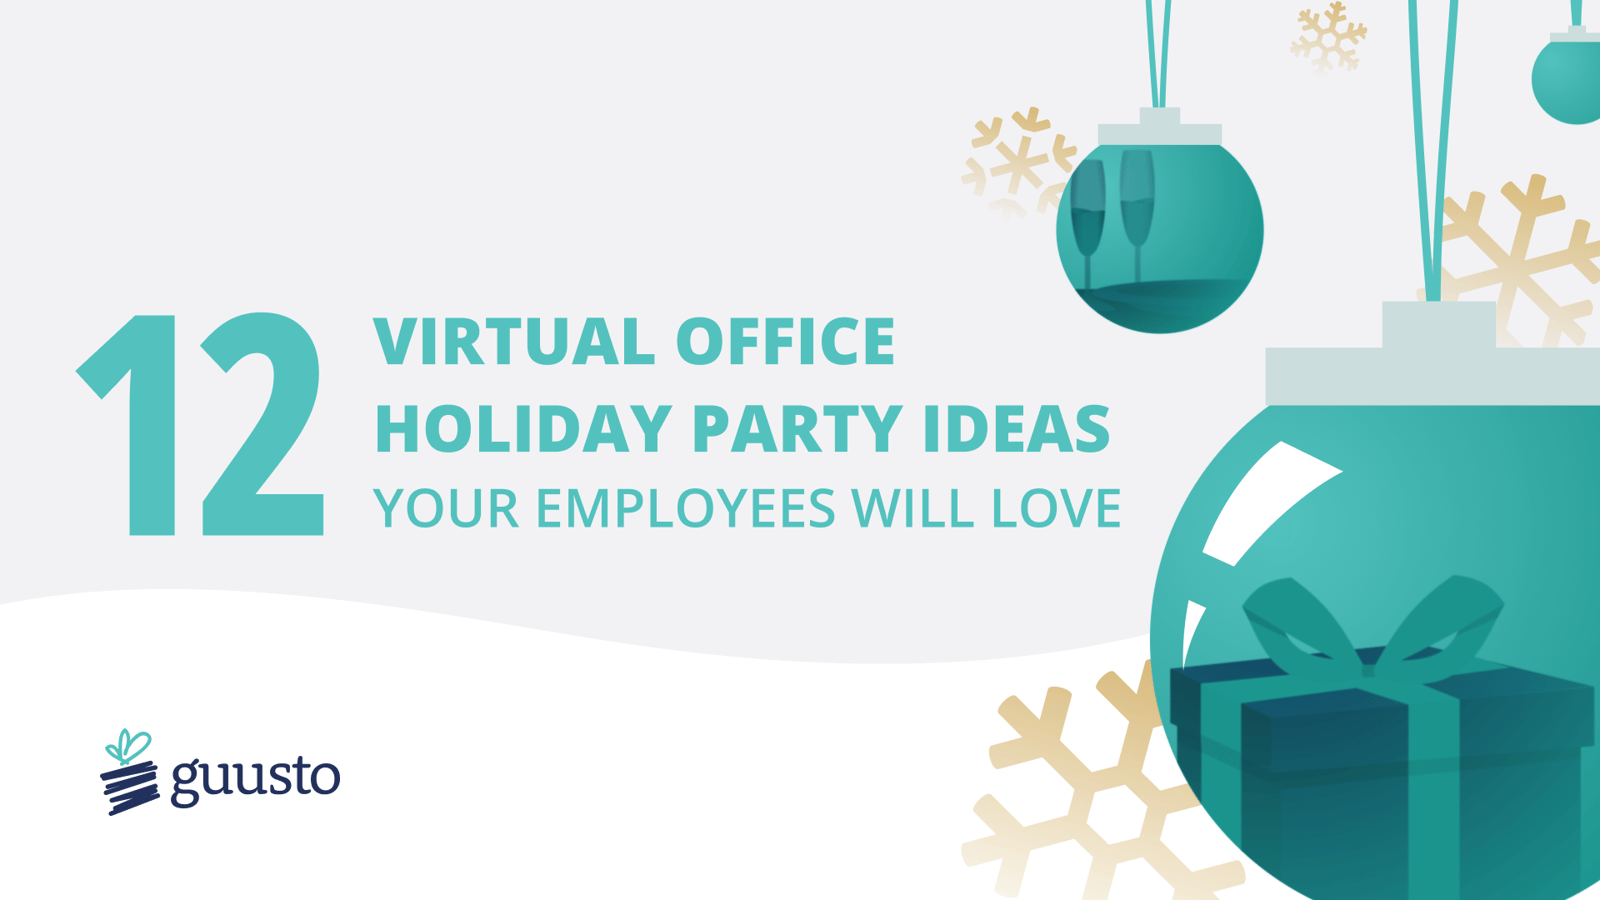 12 Virtual Office Holiday Party Ideas Your Employees Will Love